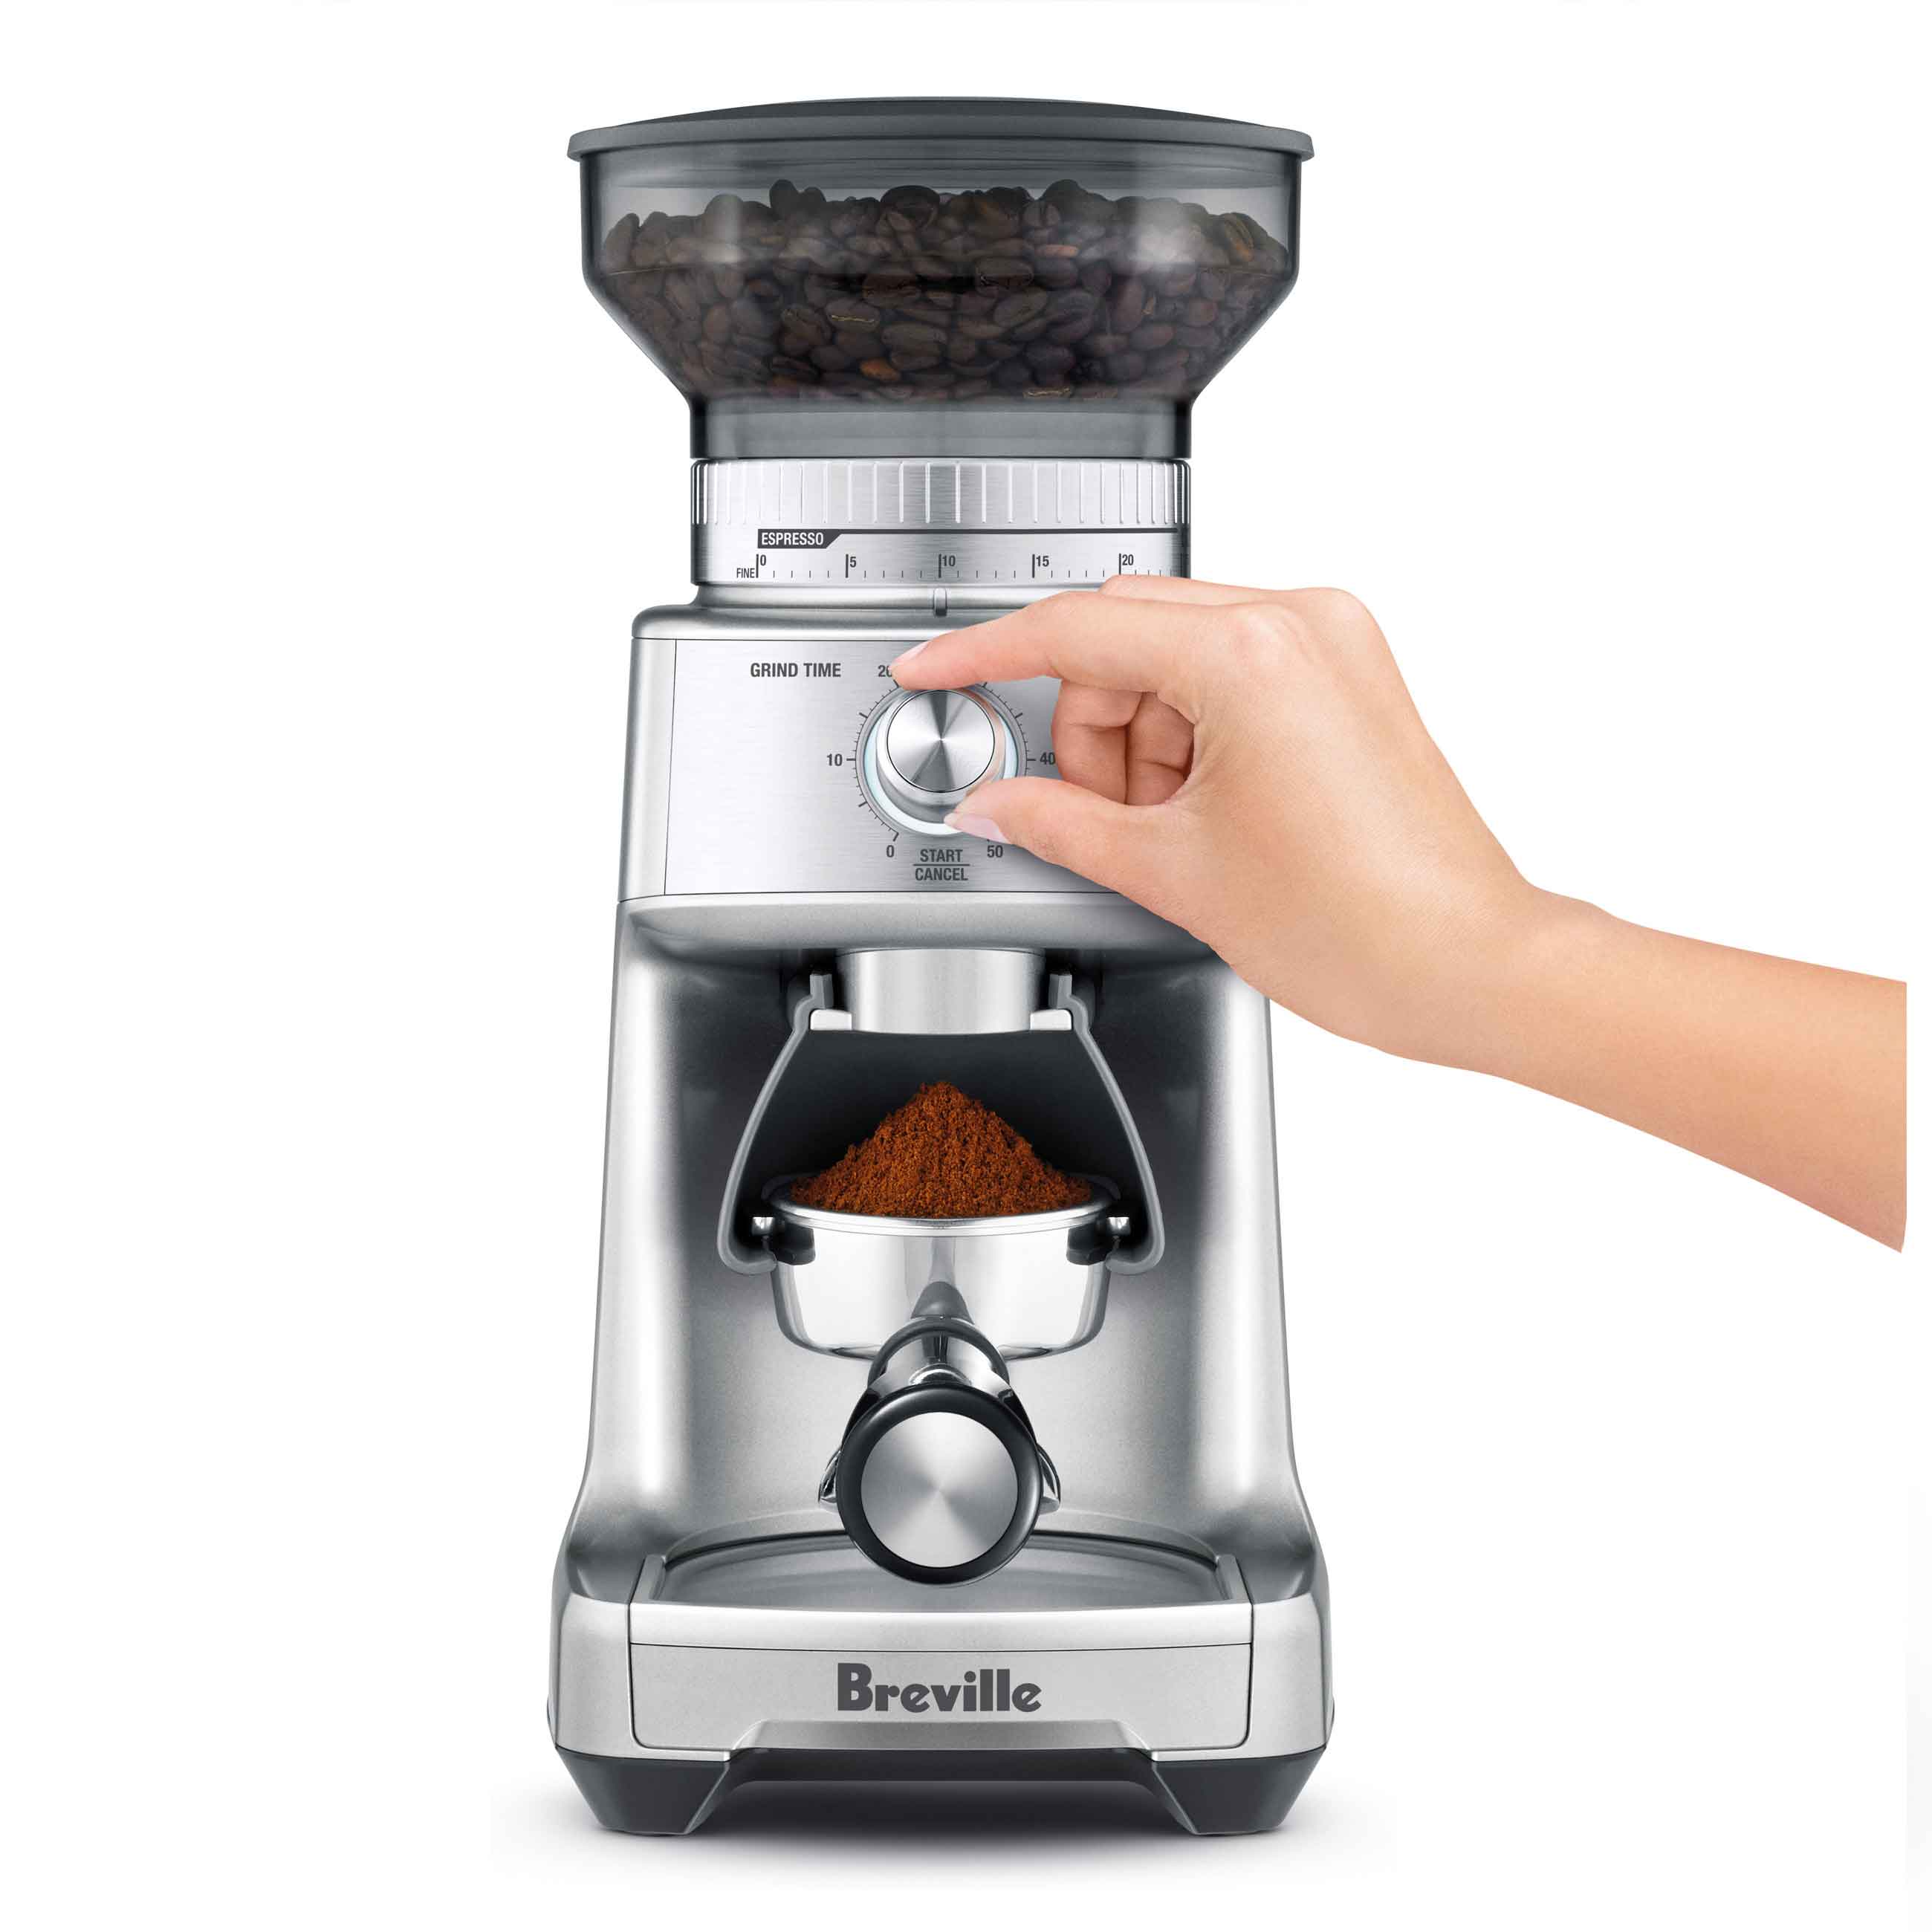 https://www.breville.com/content/dam/breville/ca/assets/coffee/finished-goods/bcg600-the-dose-control-pro/bcg600silusc-the-dose-control-pro/images/BCG600SILUSC-the-dose-control-pro-beverages-coffee-carousel2.jpg